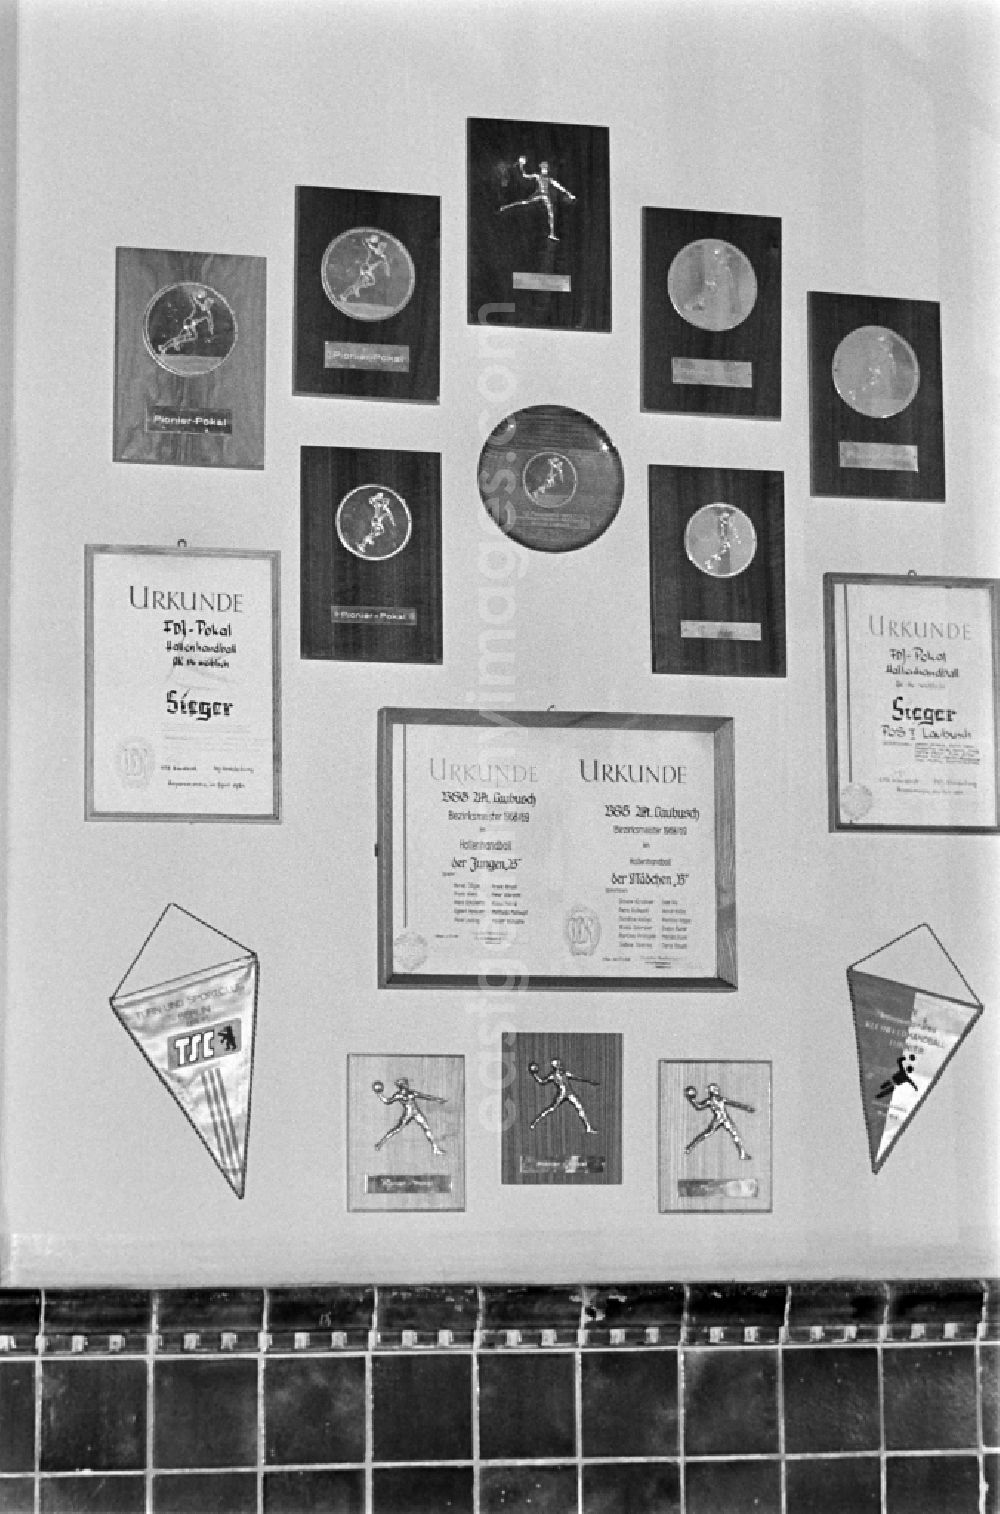 GDR image archive: Laubusch - Secondary School OS Dr. Richard Sorge at Laubuscher Markt in the Upper Lusatian workers settlement Gartenstadt Erika in Laubusch in the state of Saxony on the territory of the former GDR, German Democratic Republic. School successes - certificates and awards hang on the wall in the hallway from the staircase